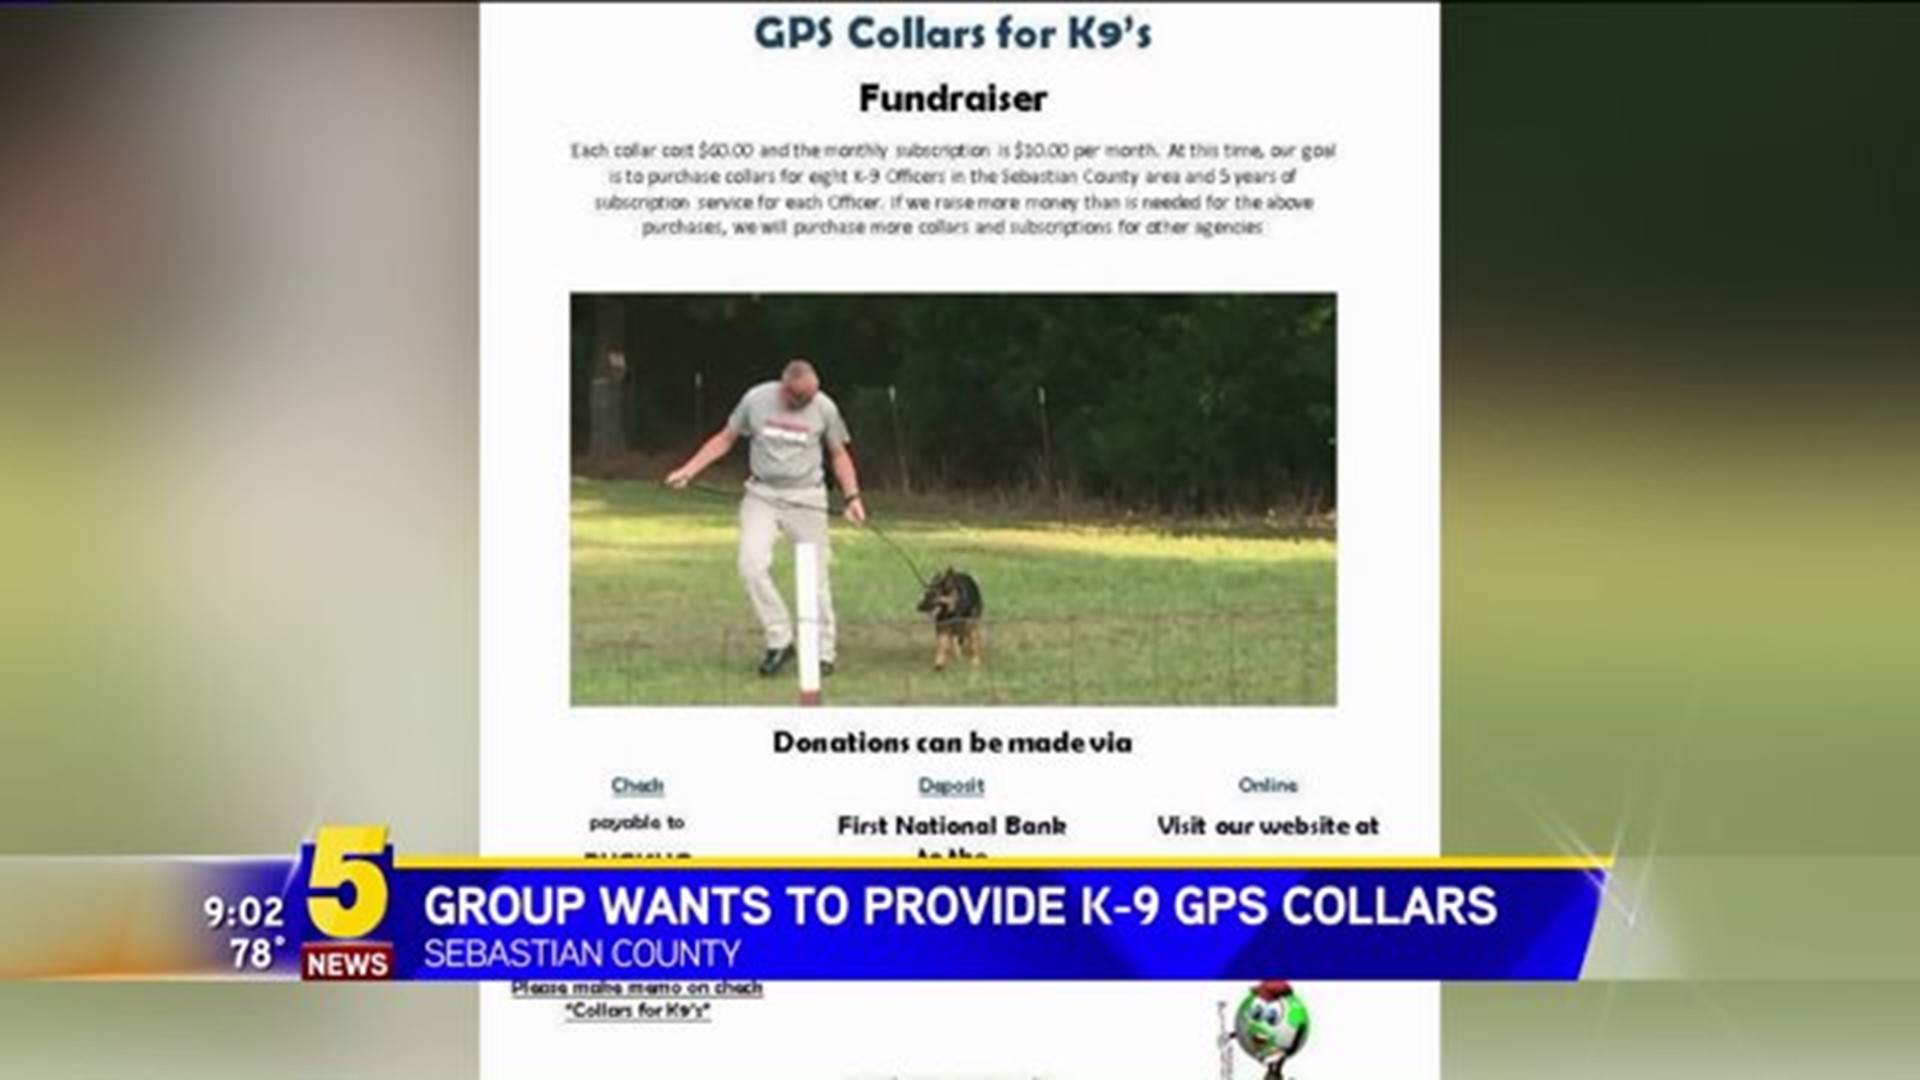 Group Wants To Provide K-9 GPS Collars